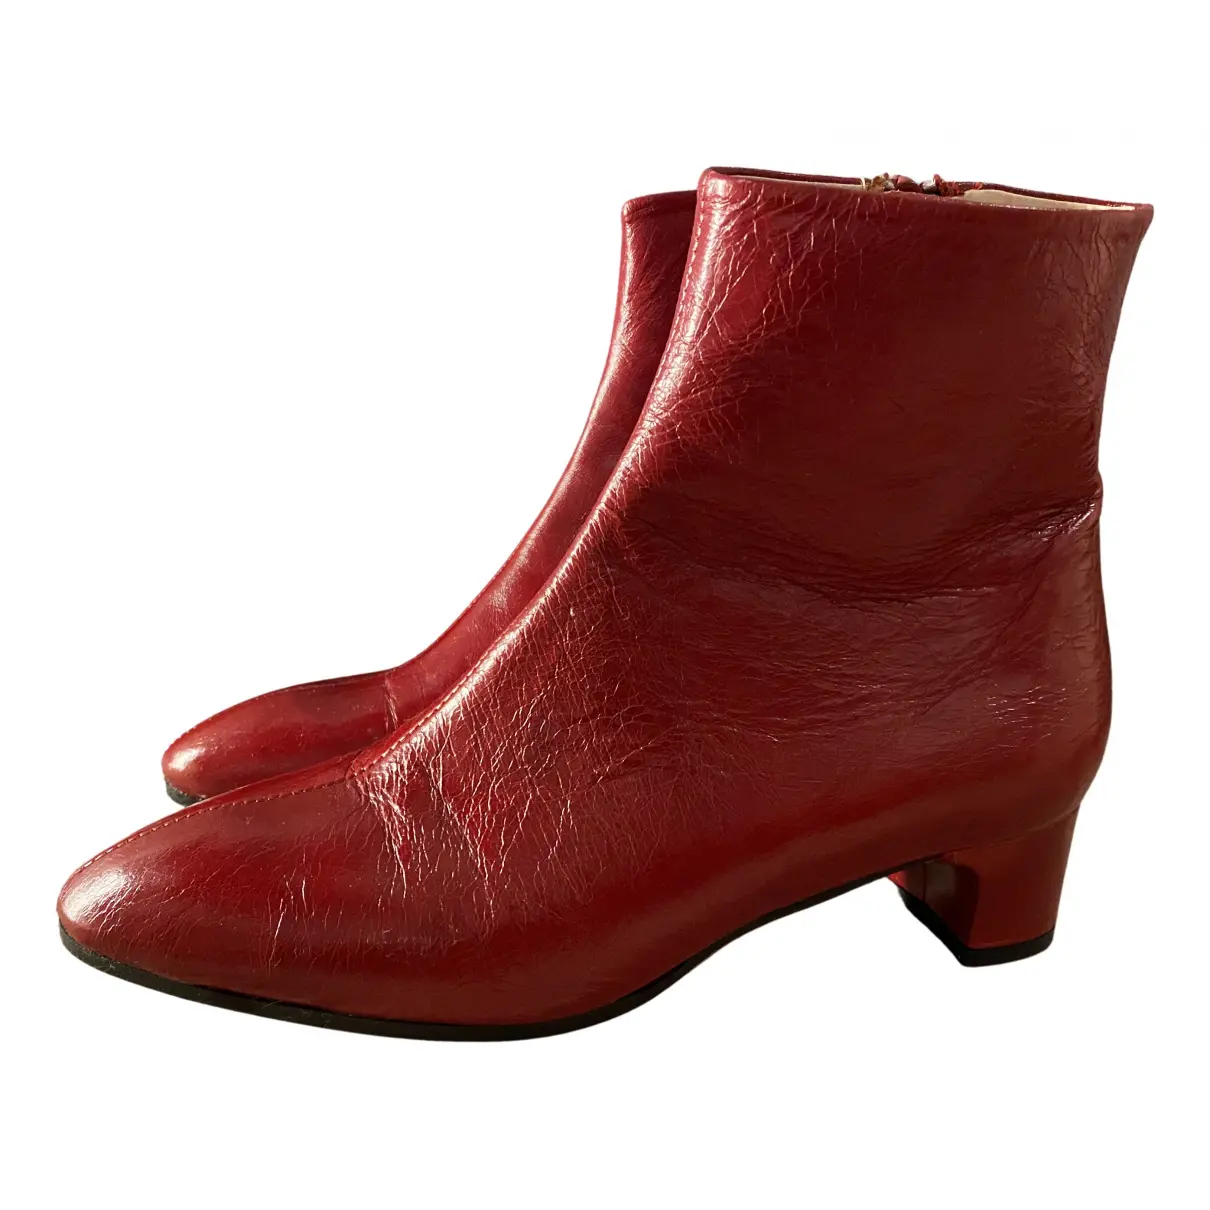 Patent leather boots Zara